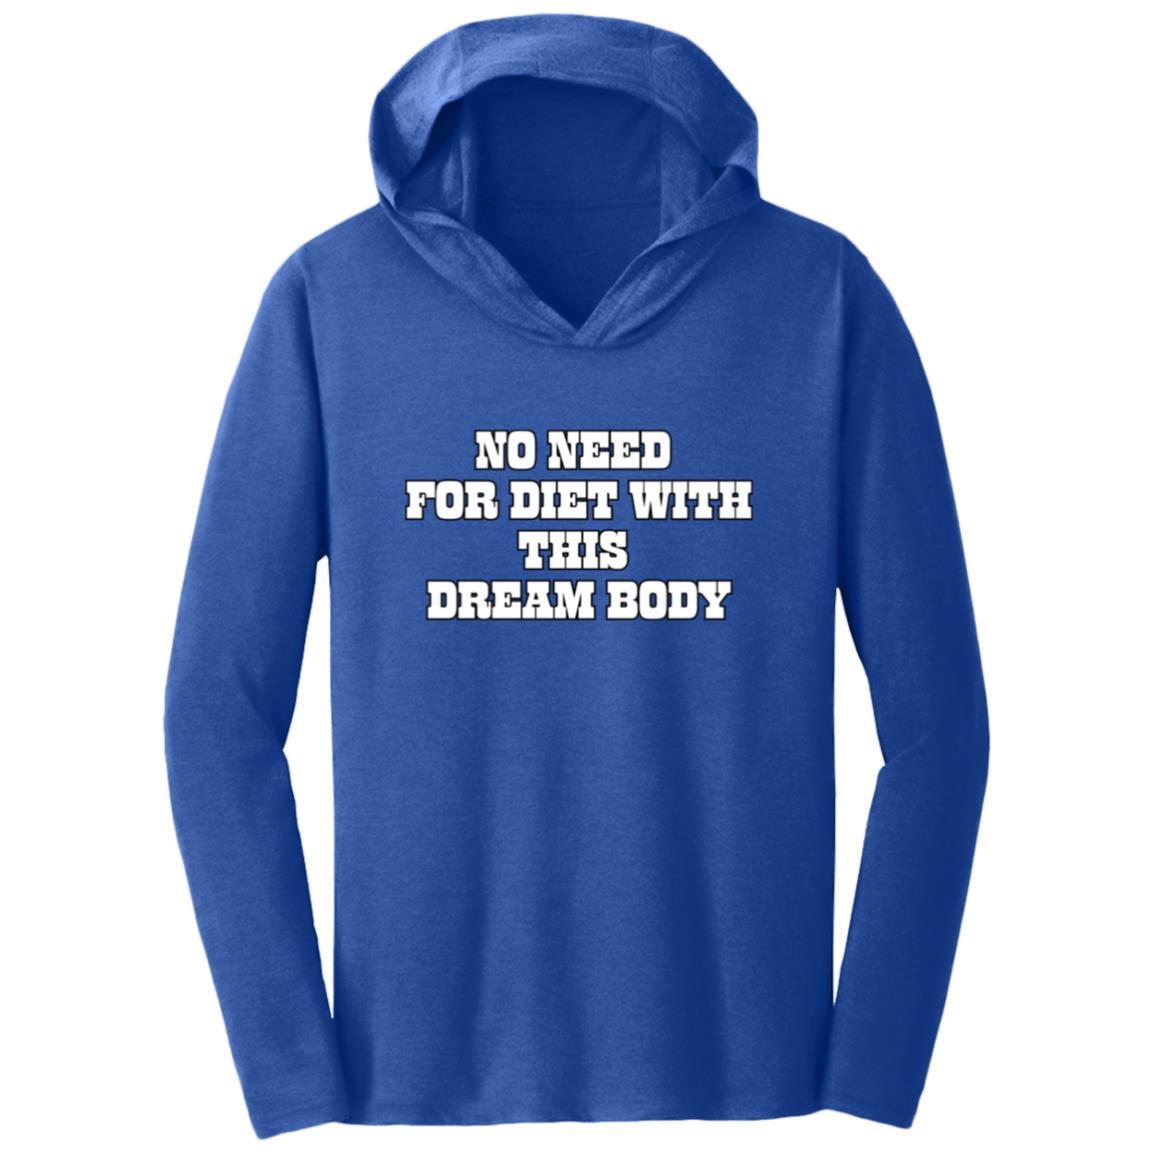 DREAM BODY DELIGHT Triblend T-Shirt Hoodie